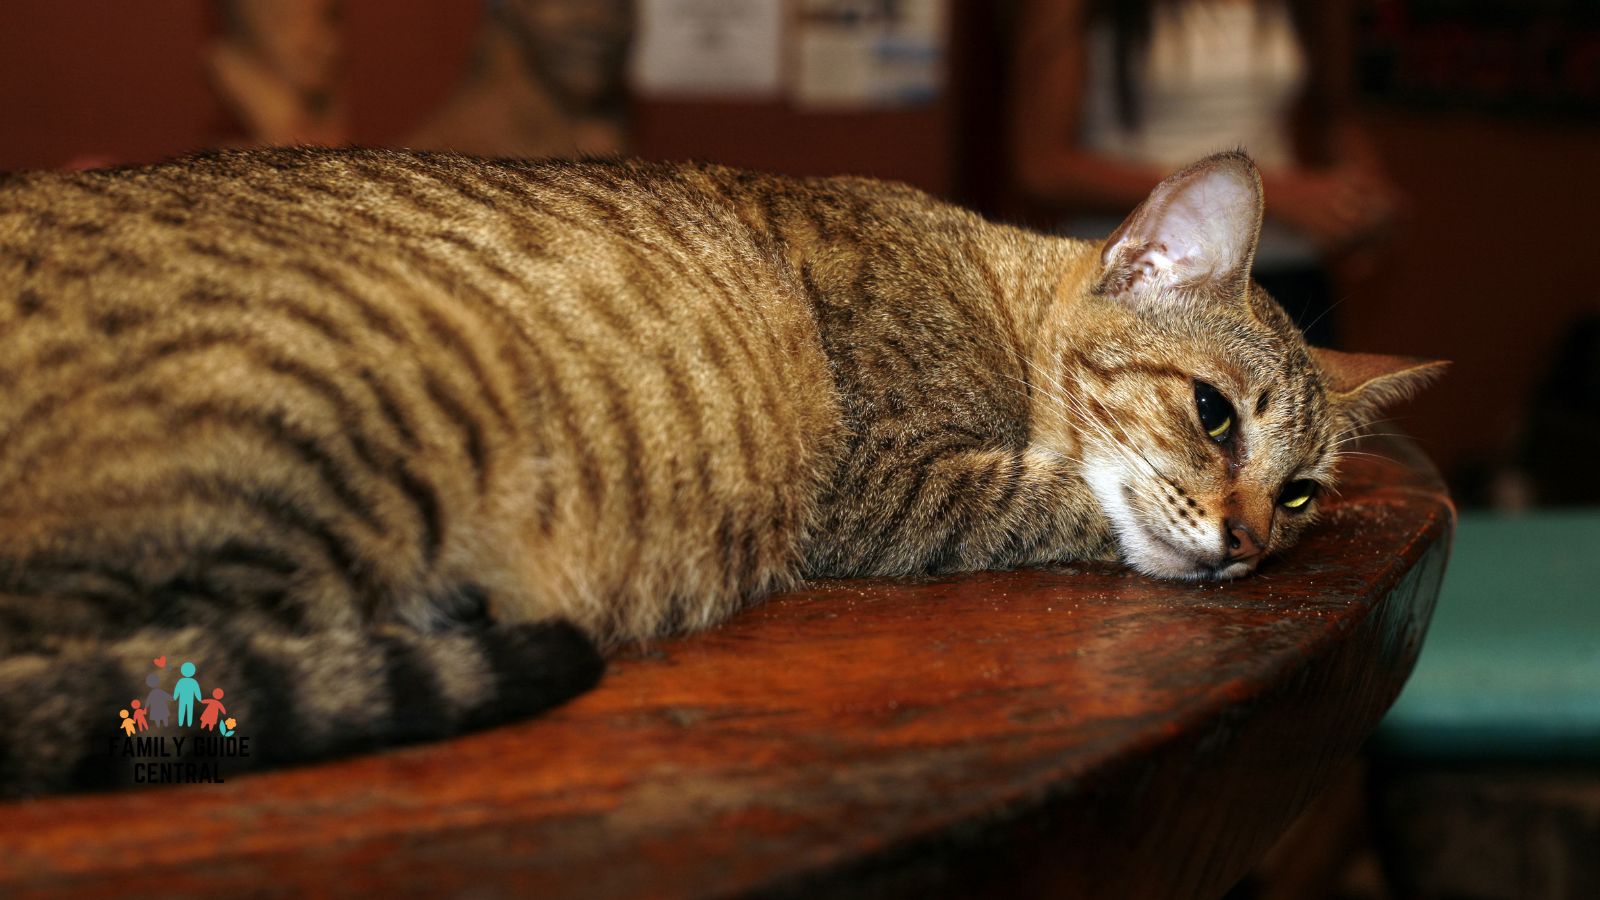 Cat laying down on a dining table - familyguidecentral.com